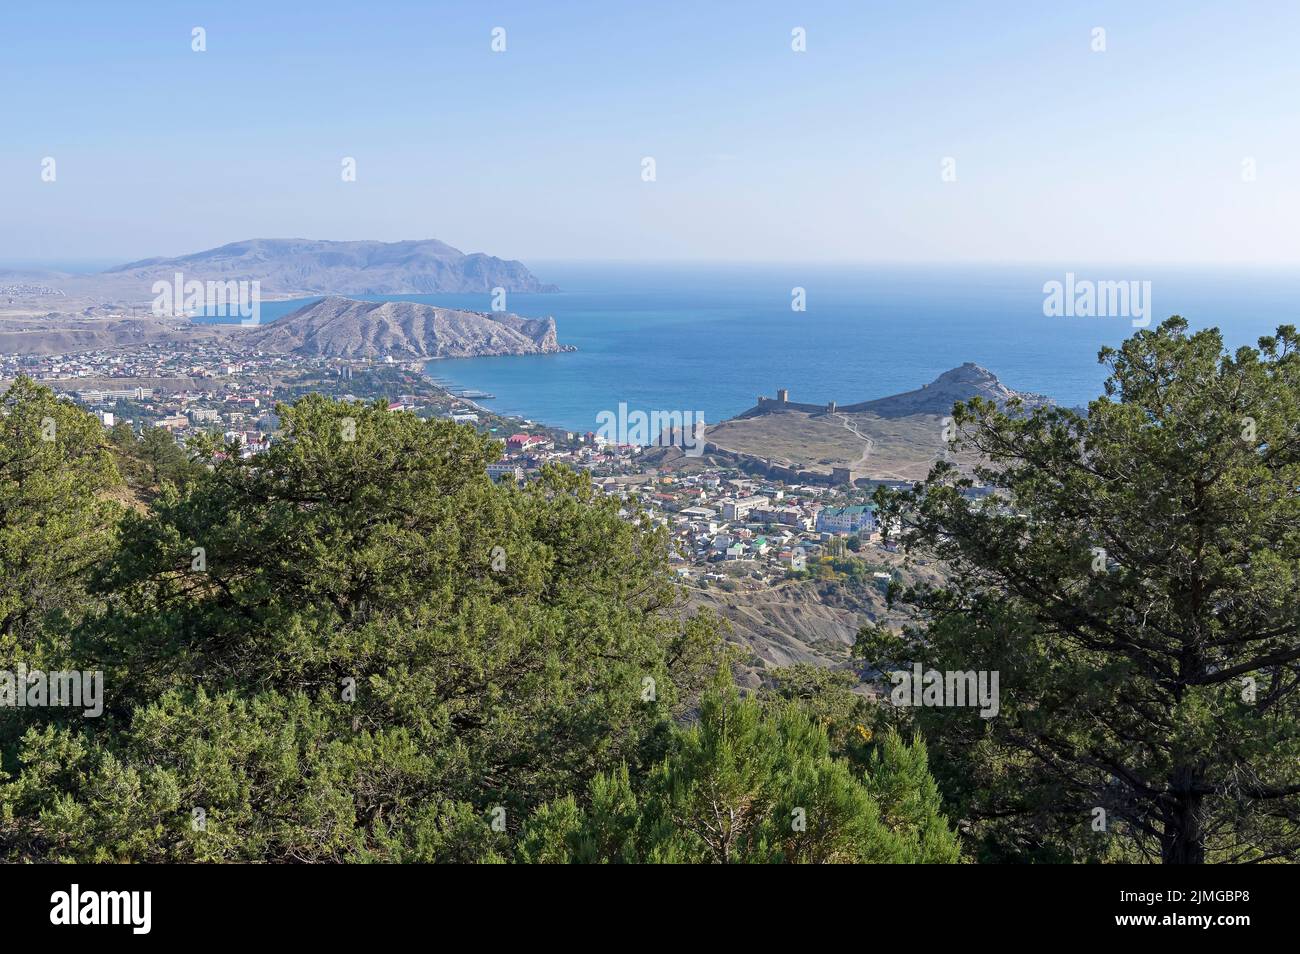 View of the small resort town from the slope of the mountain. Crimea Stock Photo